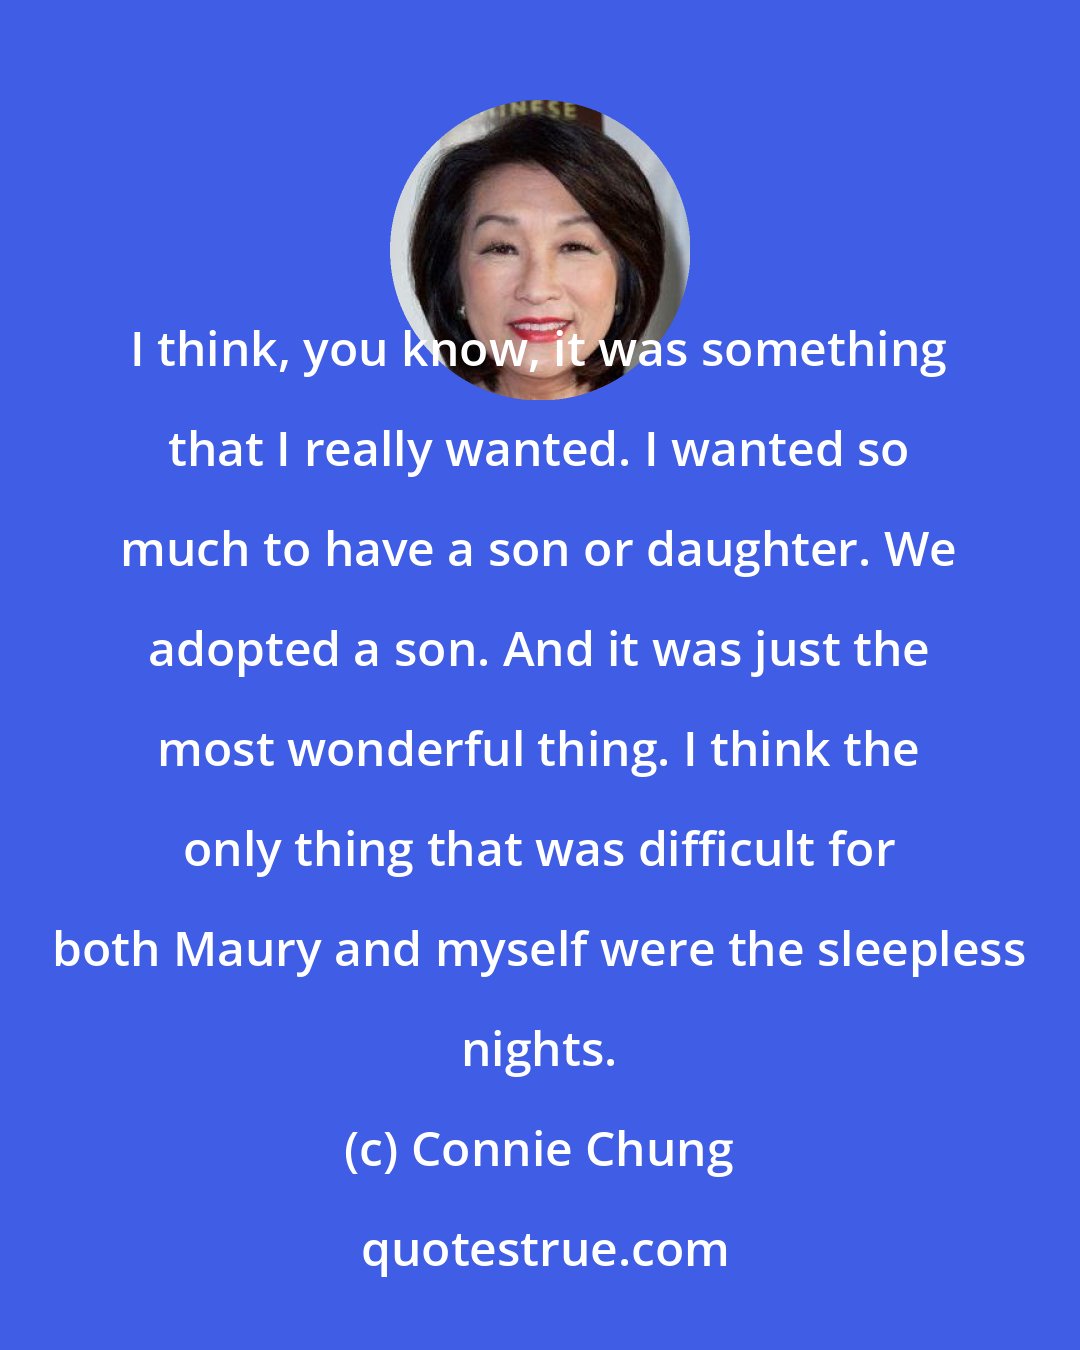 Connie Chung: I think, you know, it was something that I really wanted. I wanted so much to have a son or daughter. We adopted a son. And it was just the most wonderful thing. I think the only thing that was difficult for both Maury and myself were the sleepless nights.